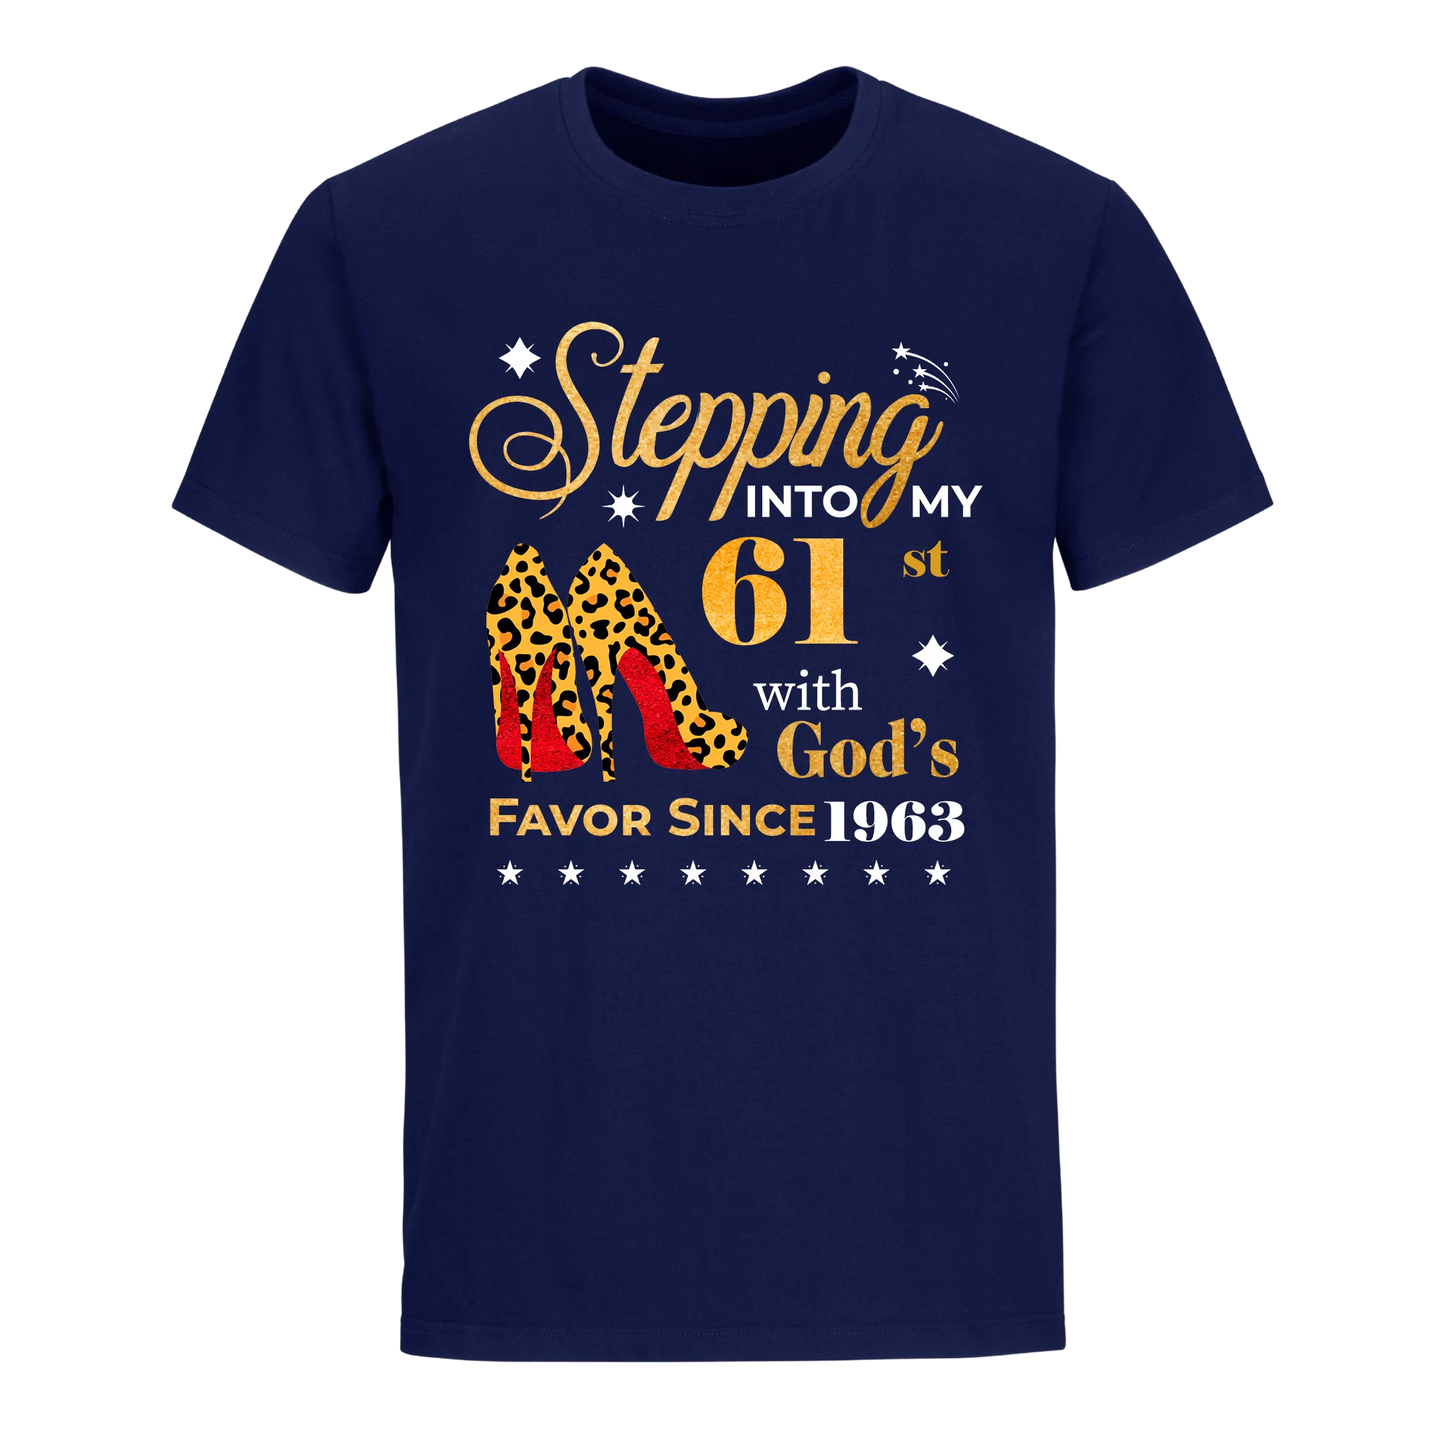 STEPPING INTO MY 61ST WITH GOD'S FAVOR SINCE 1963 UNISEX SHIRT